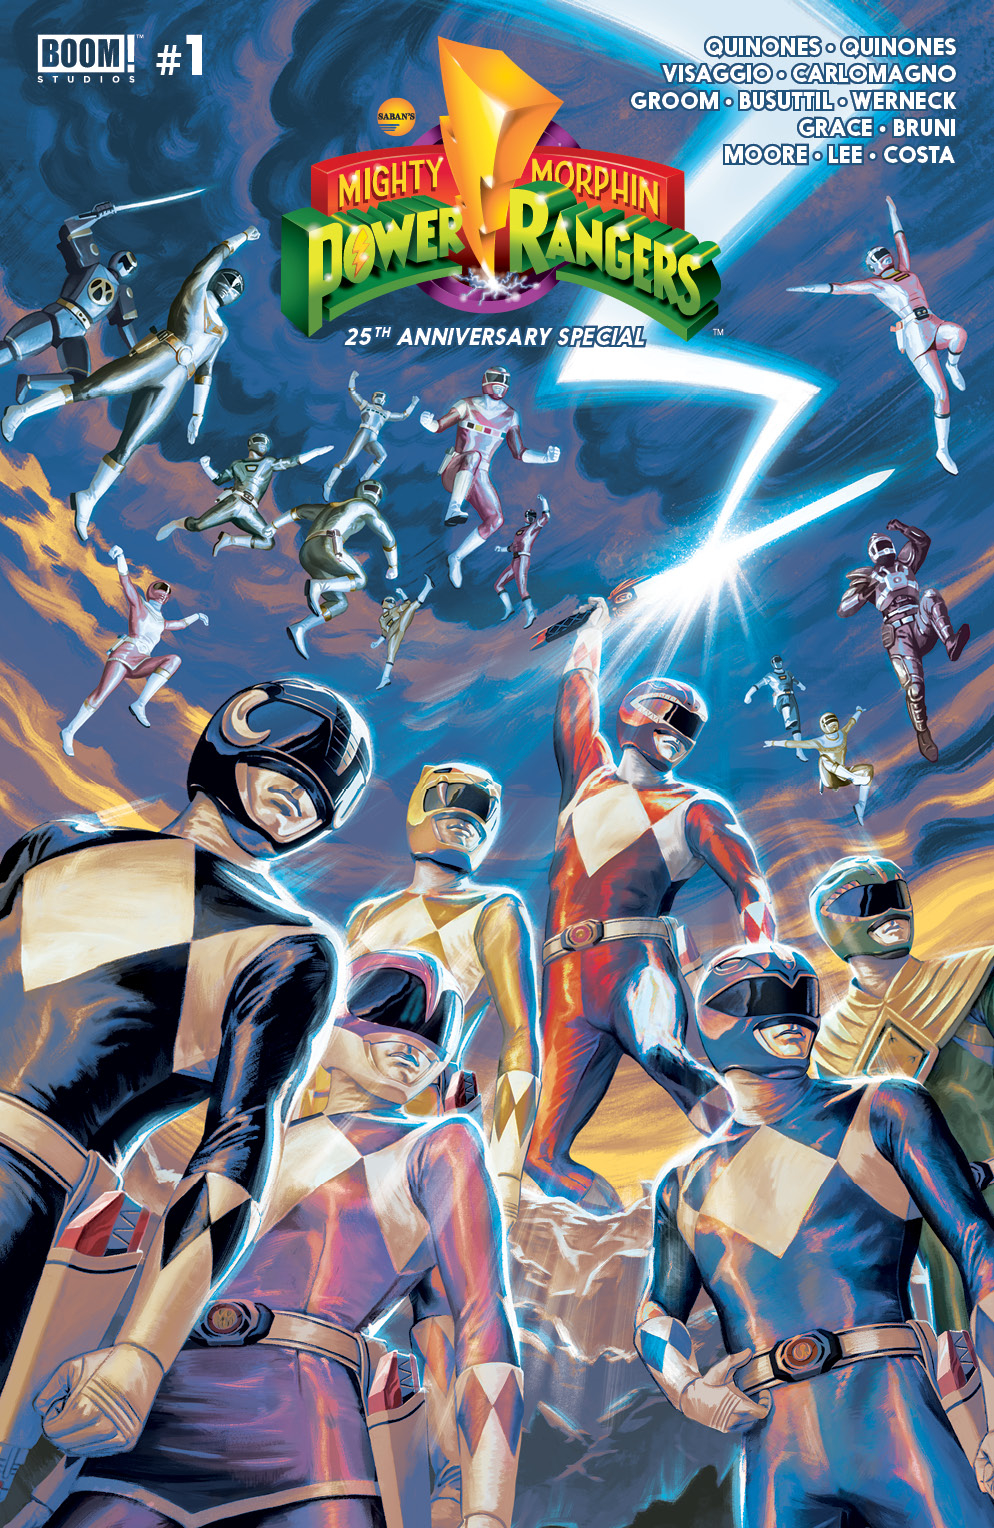 MIGHTY MORPHIN POWER RANGERS ANNIVERSARY SPECIAL #1